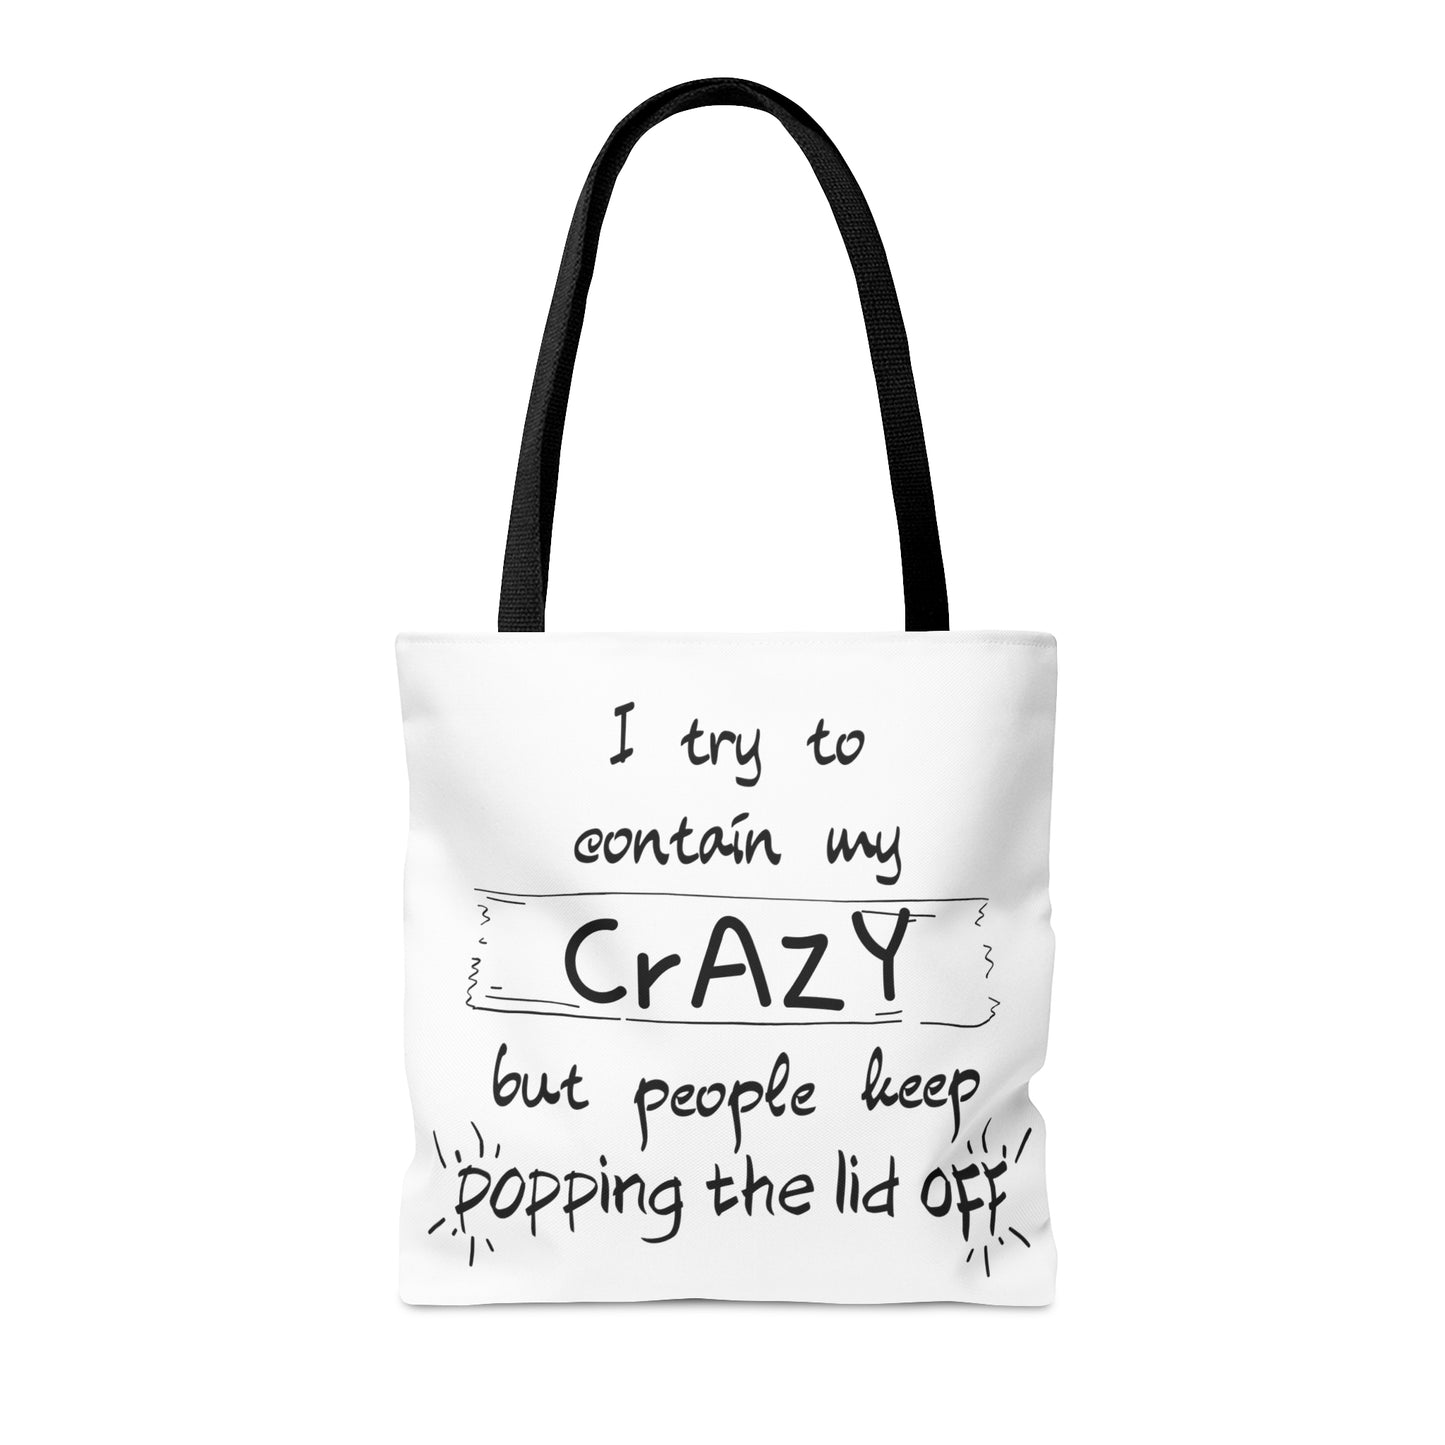 I keep trying to contain my CrAzY but people keep popping the lid off - Tote Bag (AOP)